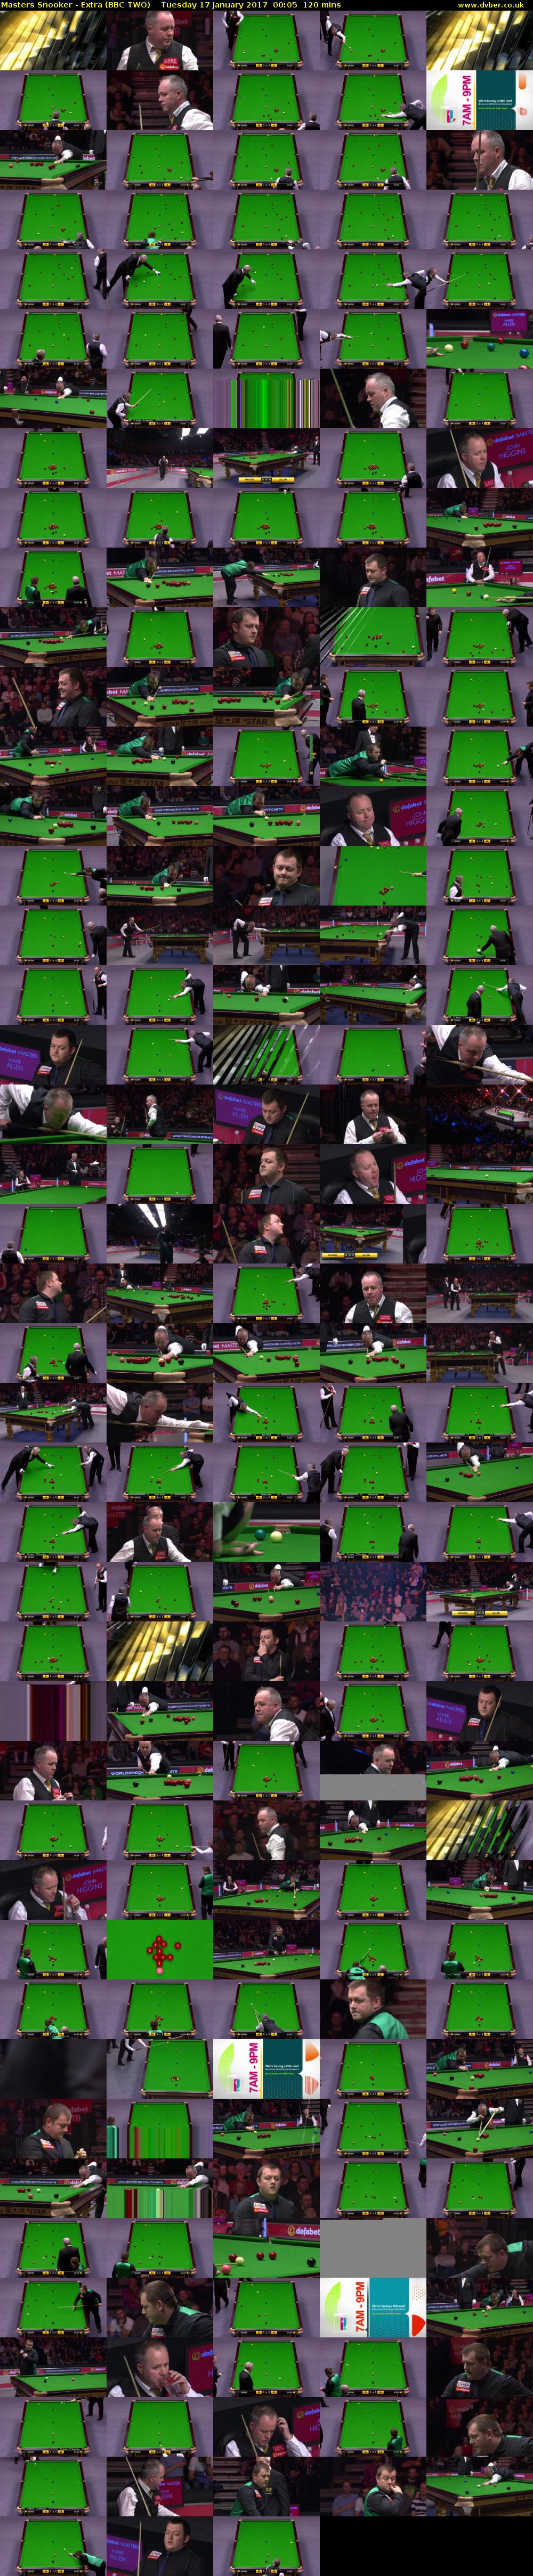 Masters Snooker - Extra (BBC TWO) Tuesday 17 January 2017 00:05 - 02:05